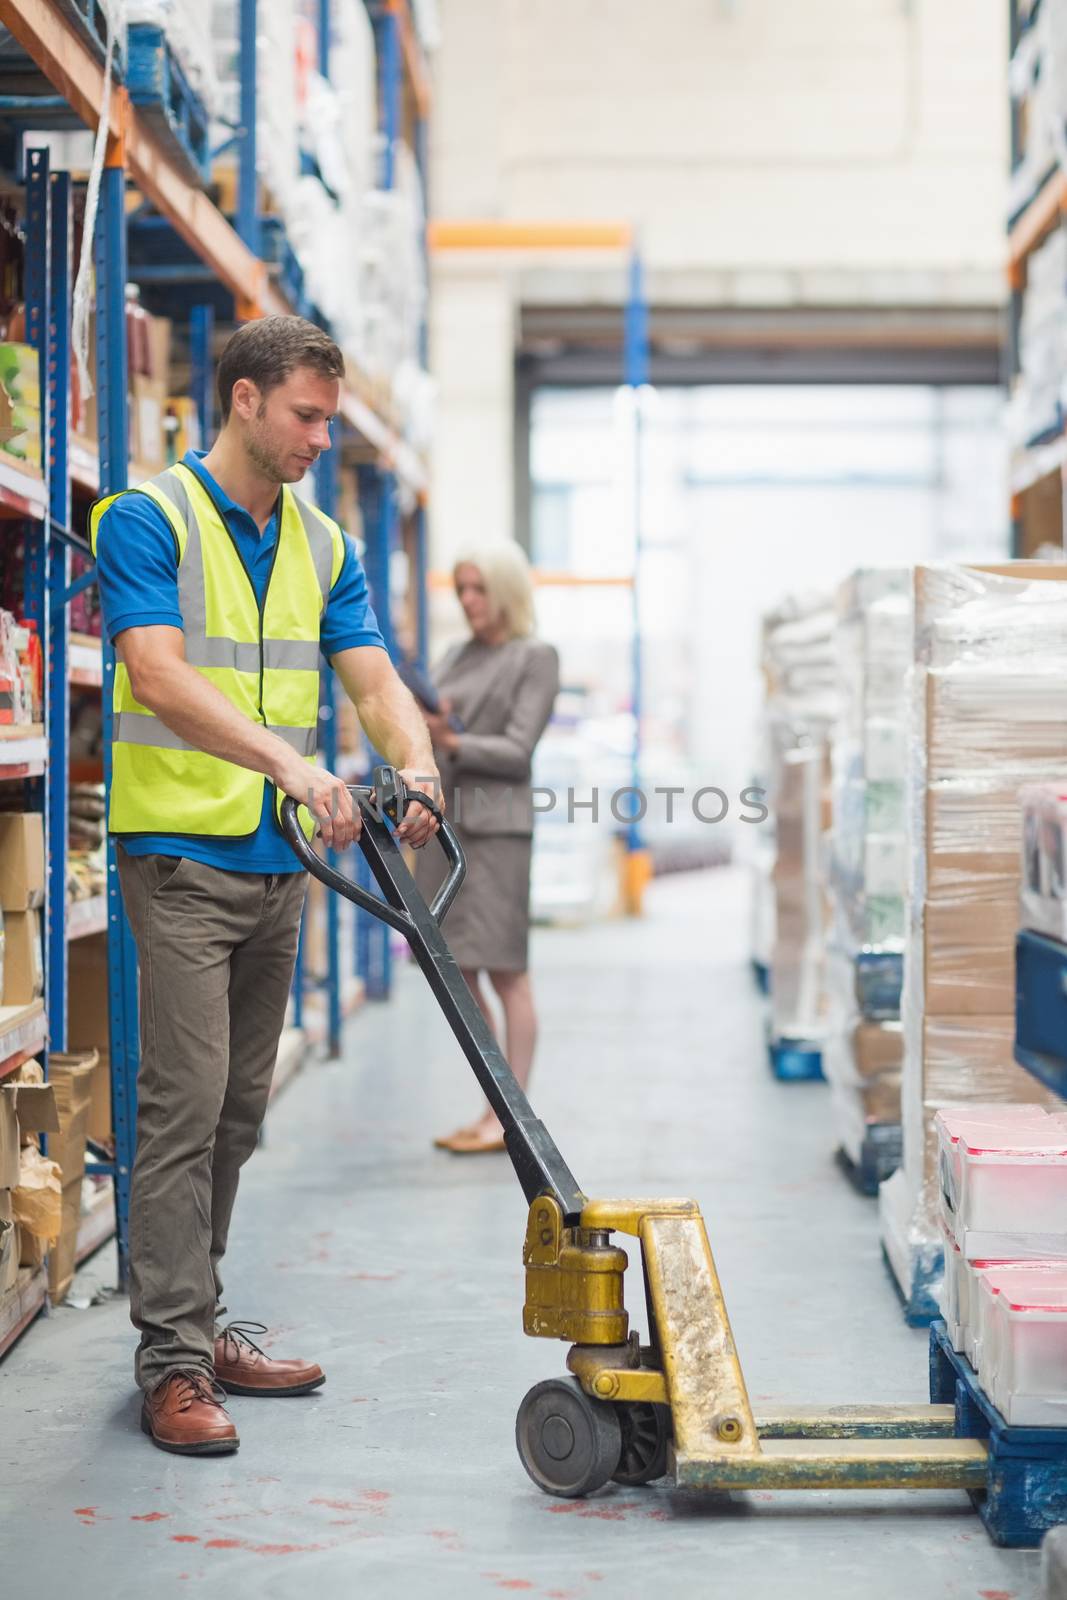 Worker pulling trolley with boxes in warehouse